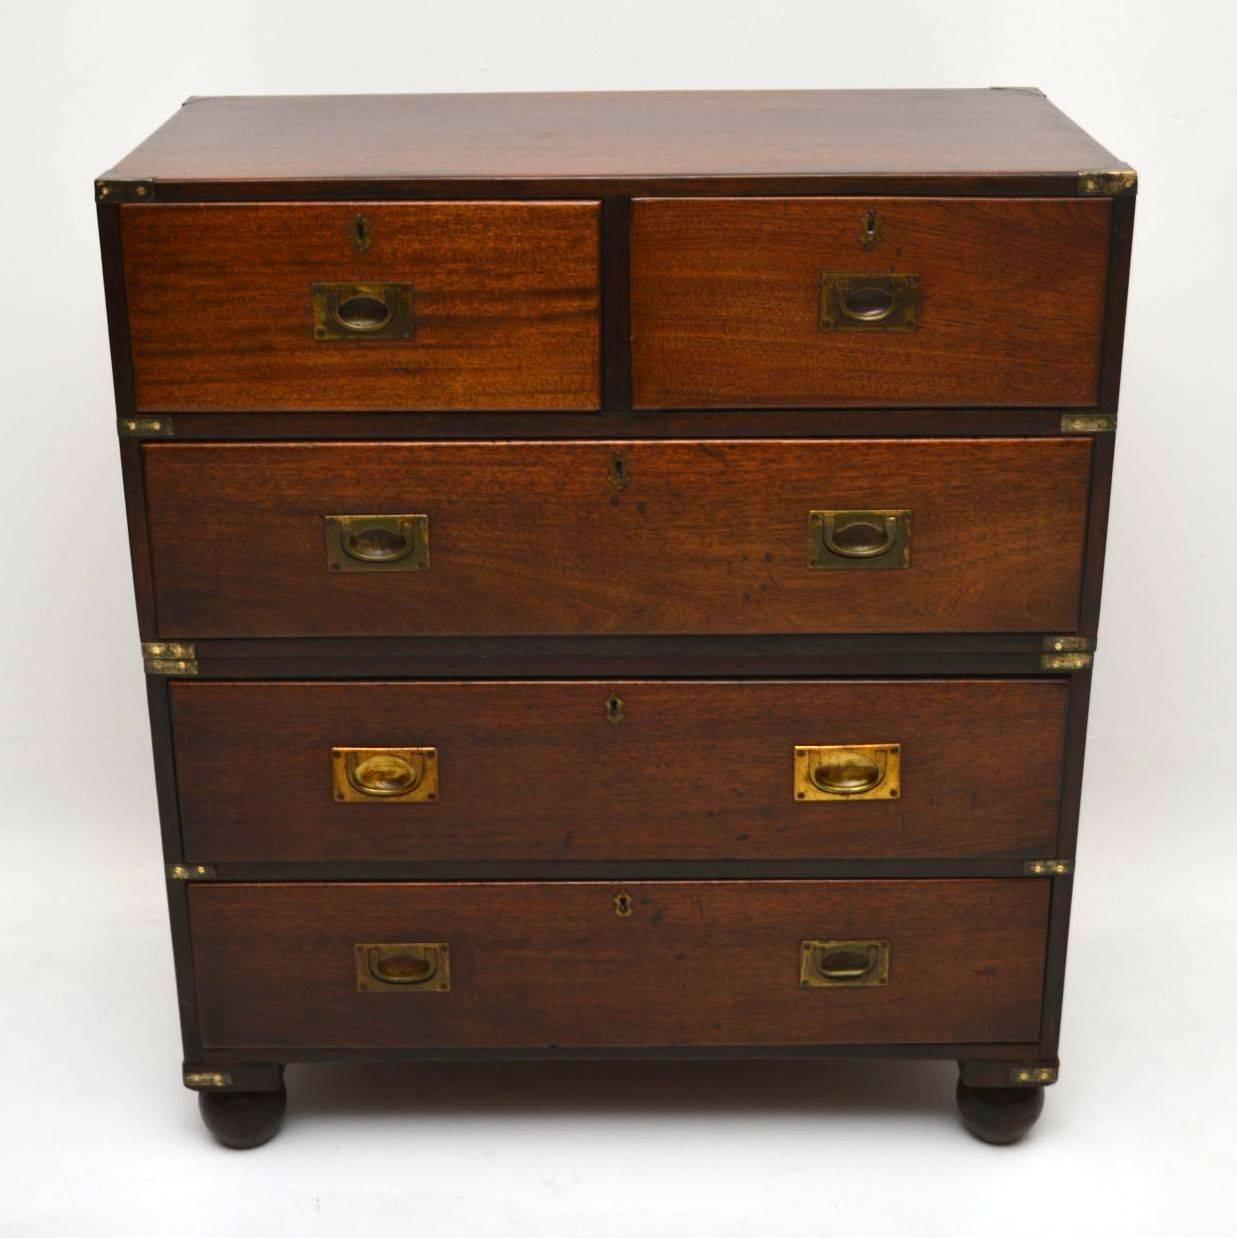 This antique Victorian mahogany Campaign chest of drawers is in good original condition and is full of character. This chest has sunken military brass handles, brass corner fittings and brass carrying handles. The brass fittings are all naturally